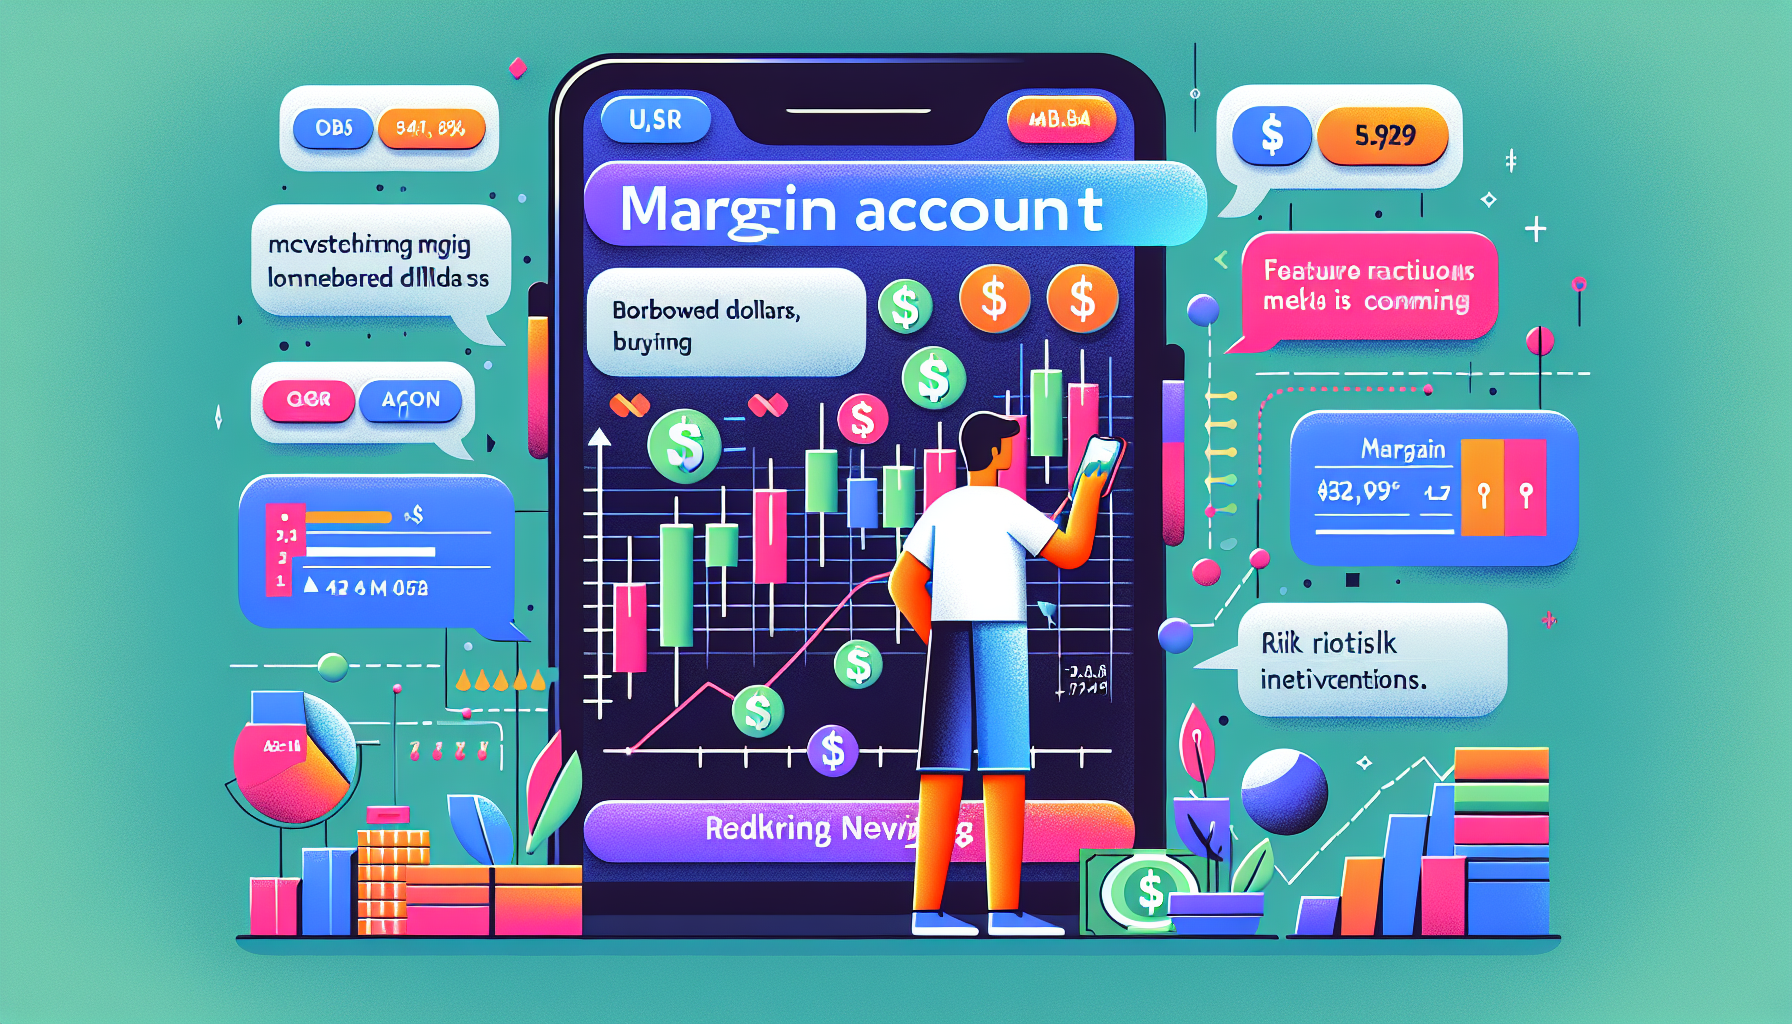 Create an illustration that visually explains how a Robinhood margin account works. The scene should include a user interface of the Robinhood app on a smartphone showing Margin Investing, with visual cues such as dollars being borrowed, stock purchases, and interest rates. Include a user reading terms and conditions with a focus on risk warnings. Make the background friendly and modern to reflect the tech-savvy nature of Robinhood users.